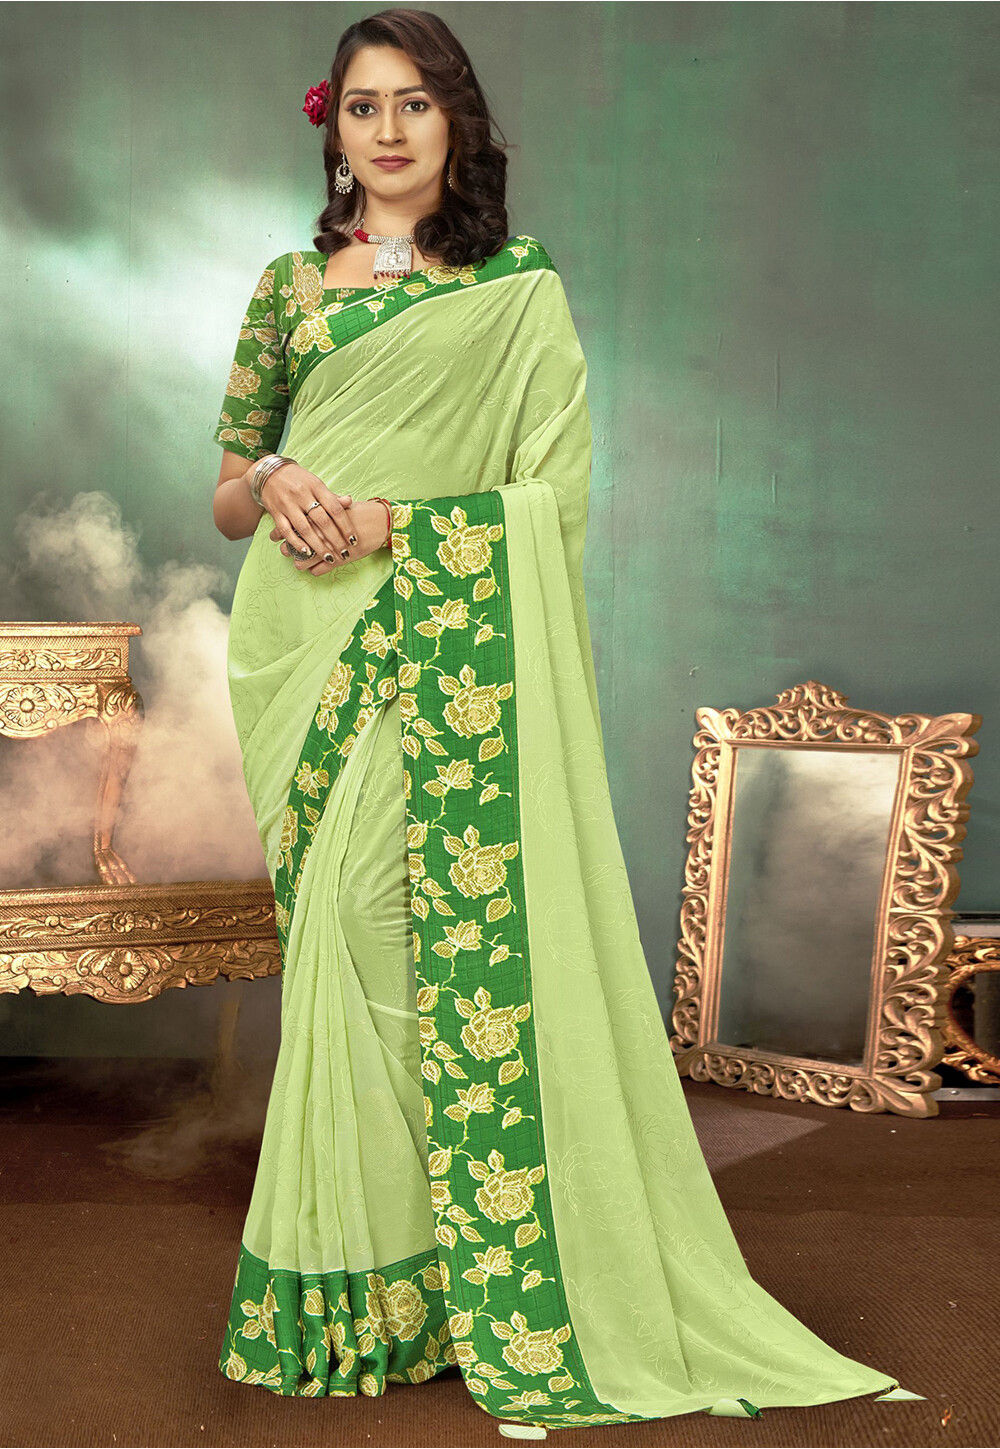 New embroidered light green color saree with digital print blouse.